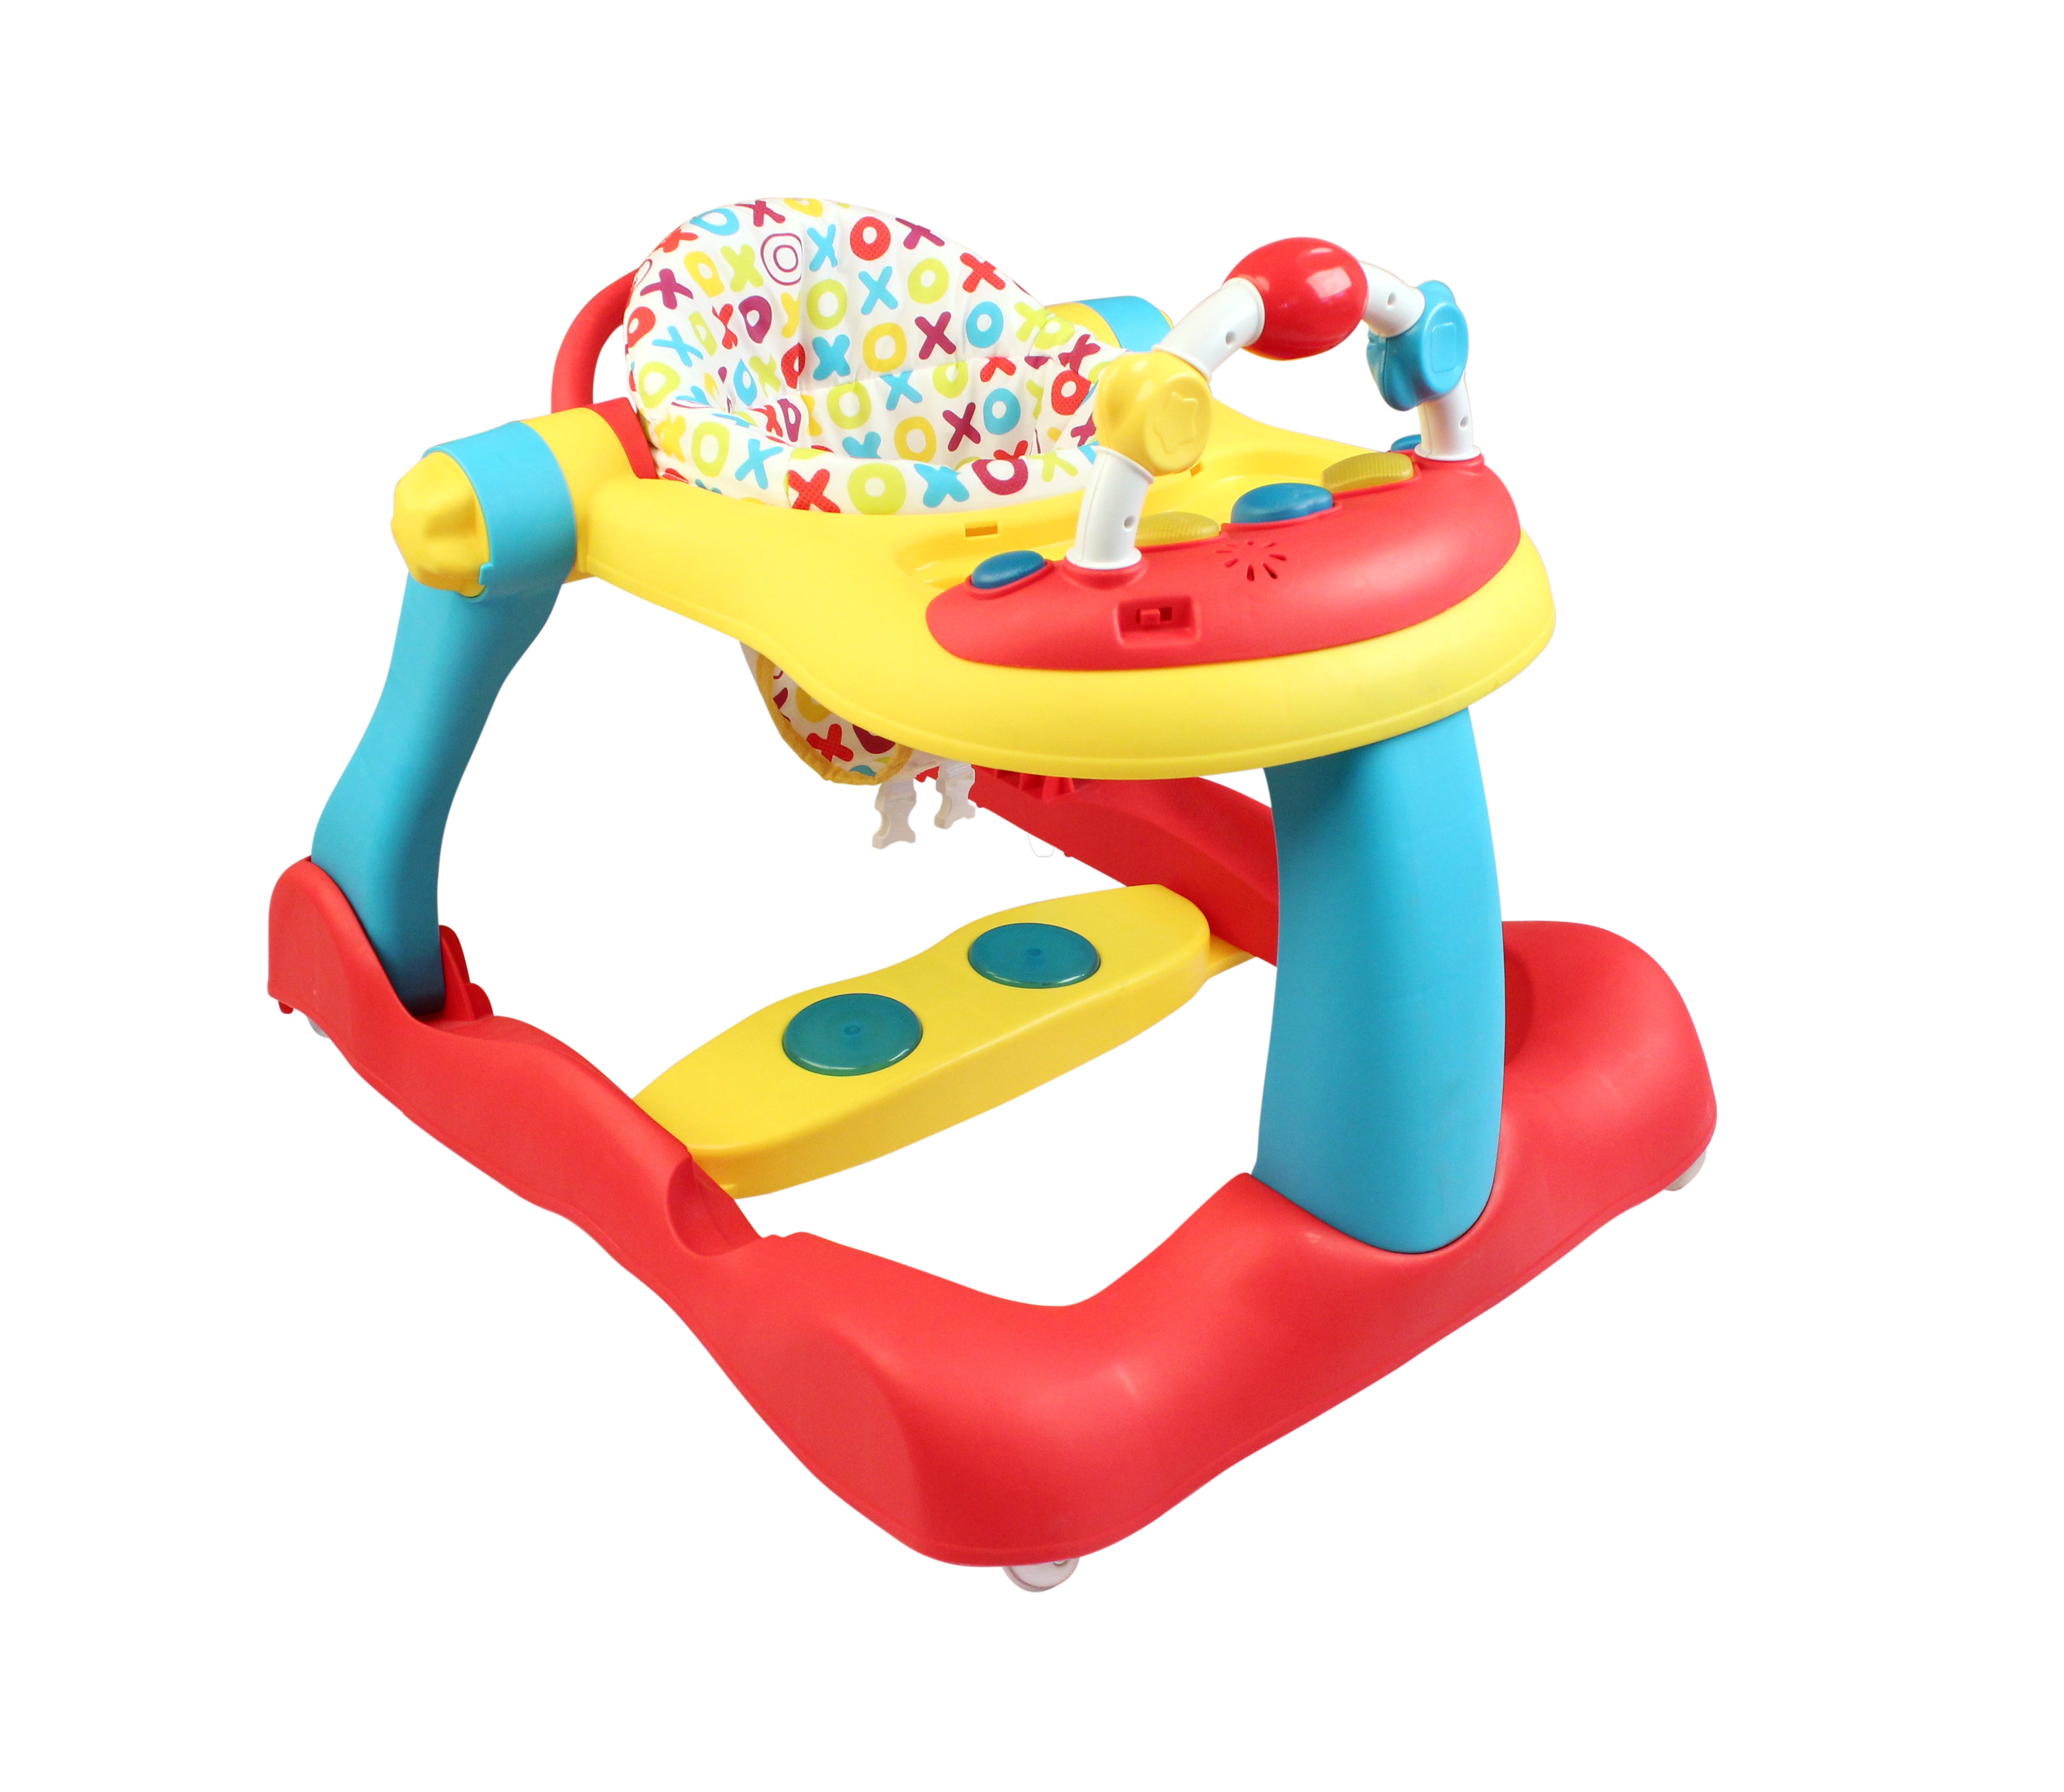 Creative Baby Bounce Steps 3 in 1 Walker (Red)